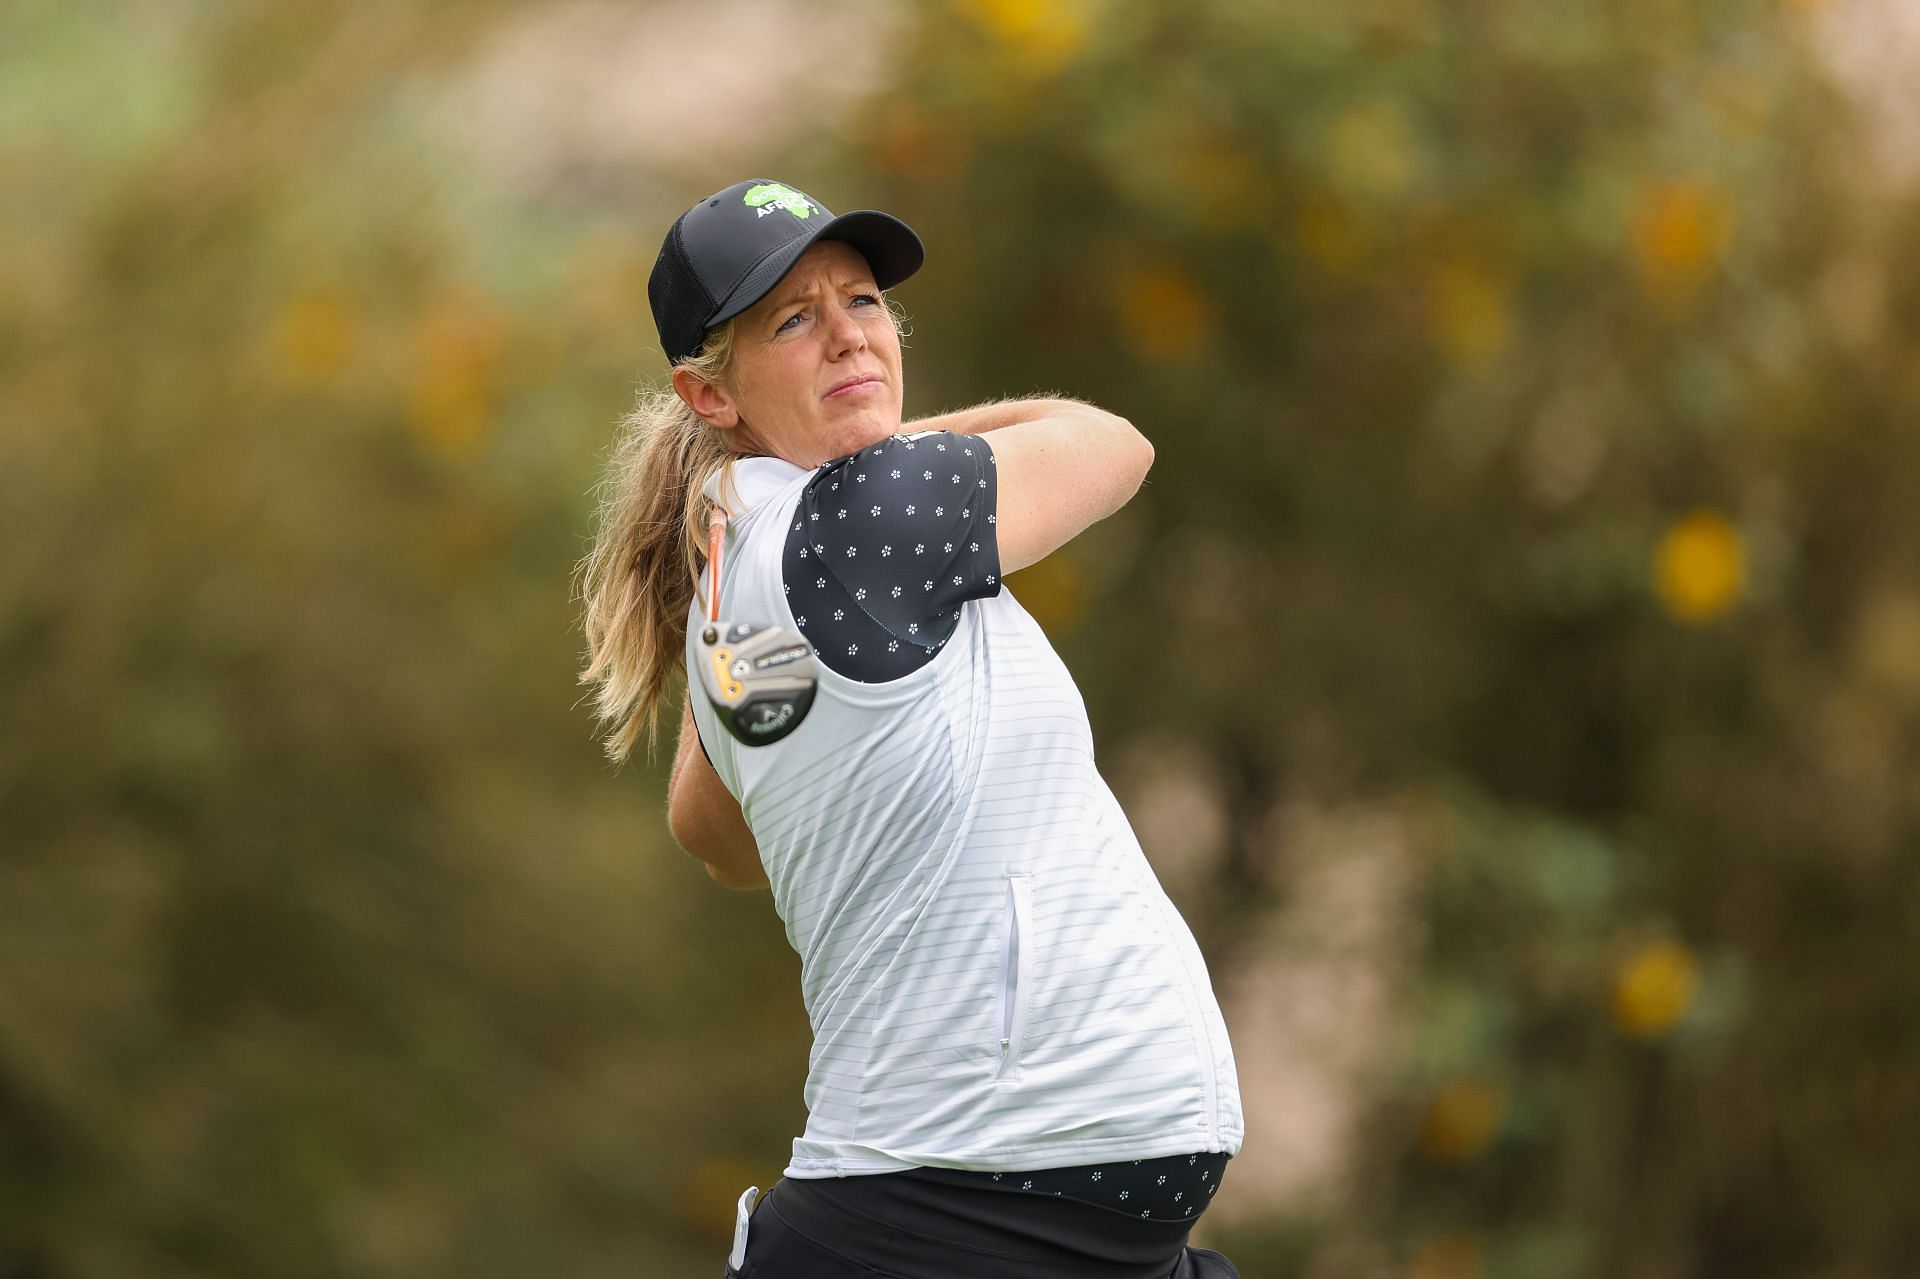 “They need to eat, they need to sleep” Pregnant golfer Amy Olson